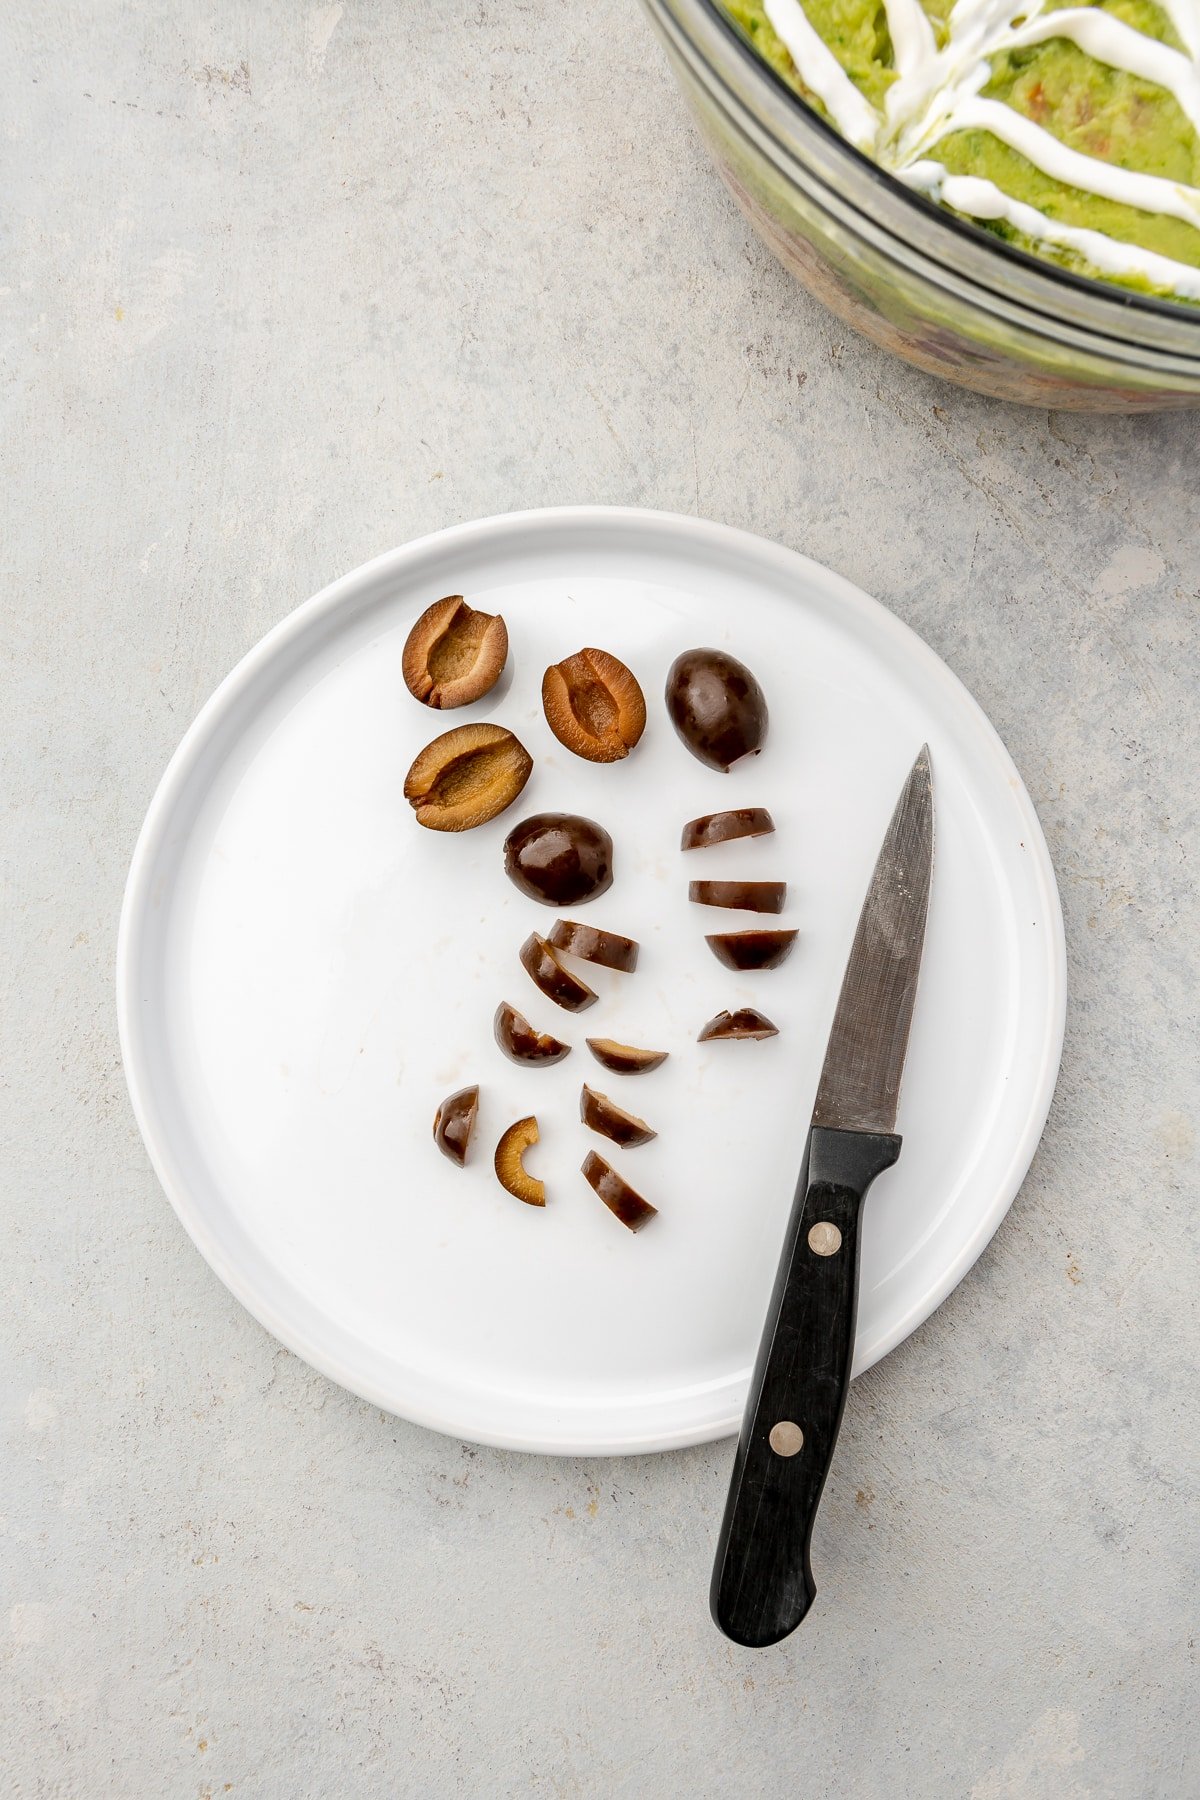 Black olives being sliced on a white plate.